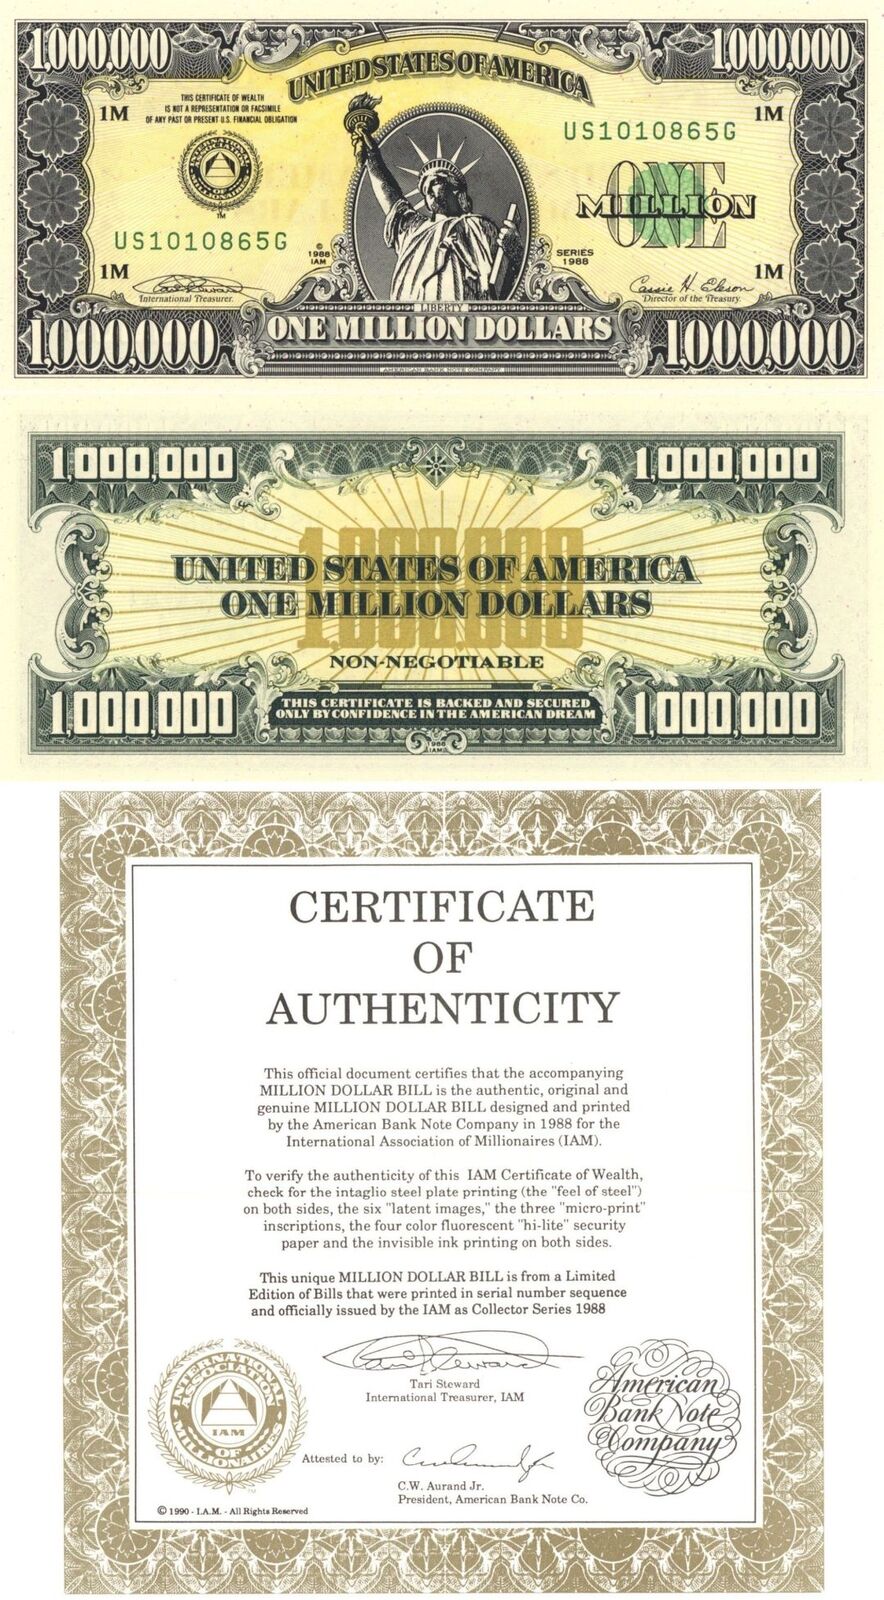 $1,000,000 Note - 1988 dated Million Dollar Bill Novelty made by American Bankno